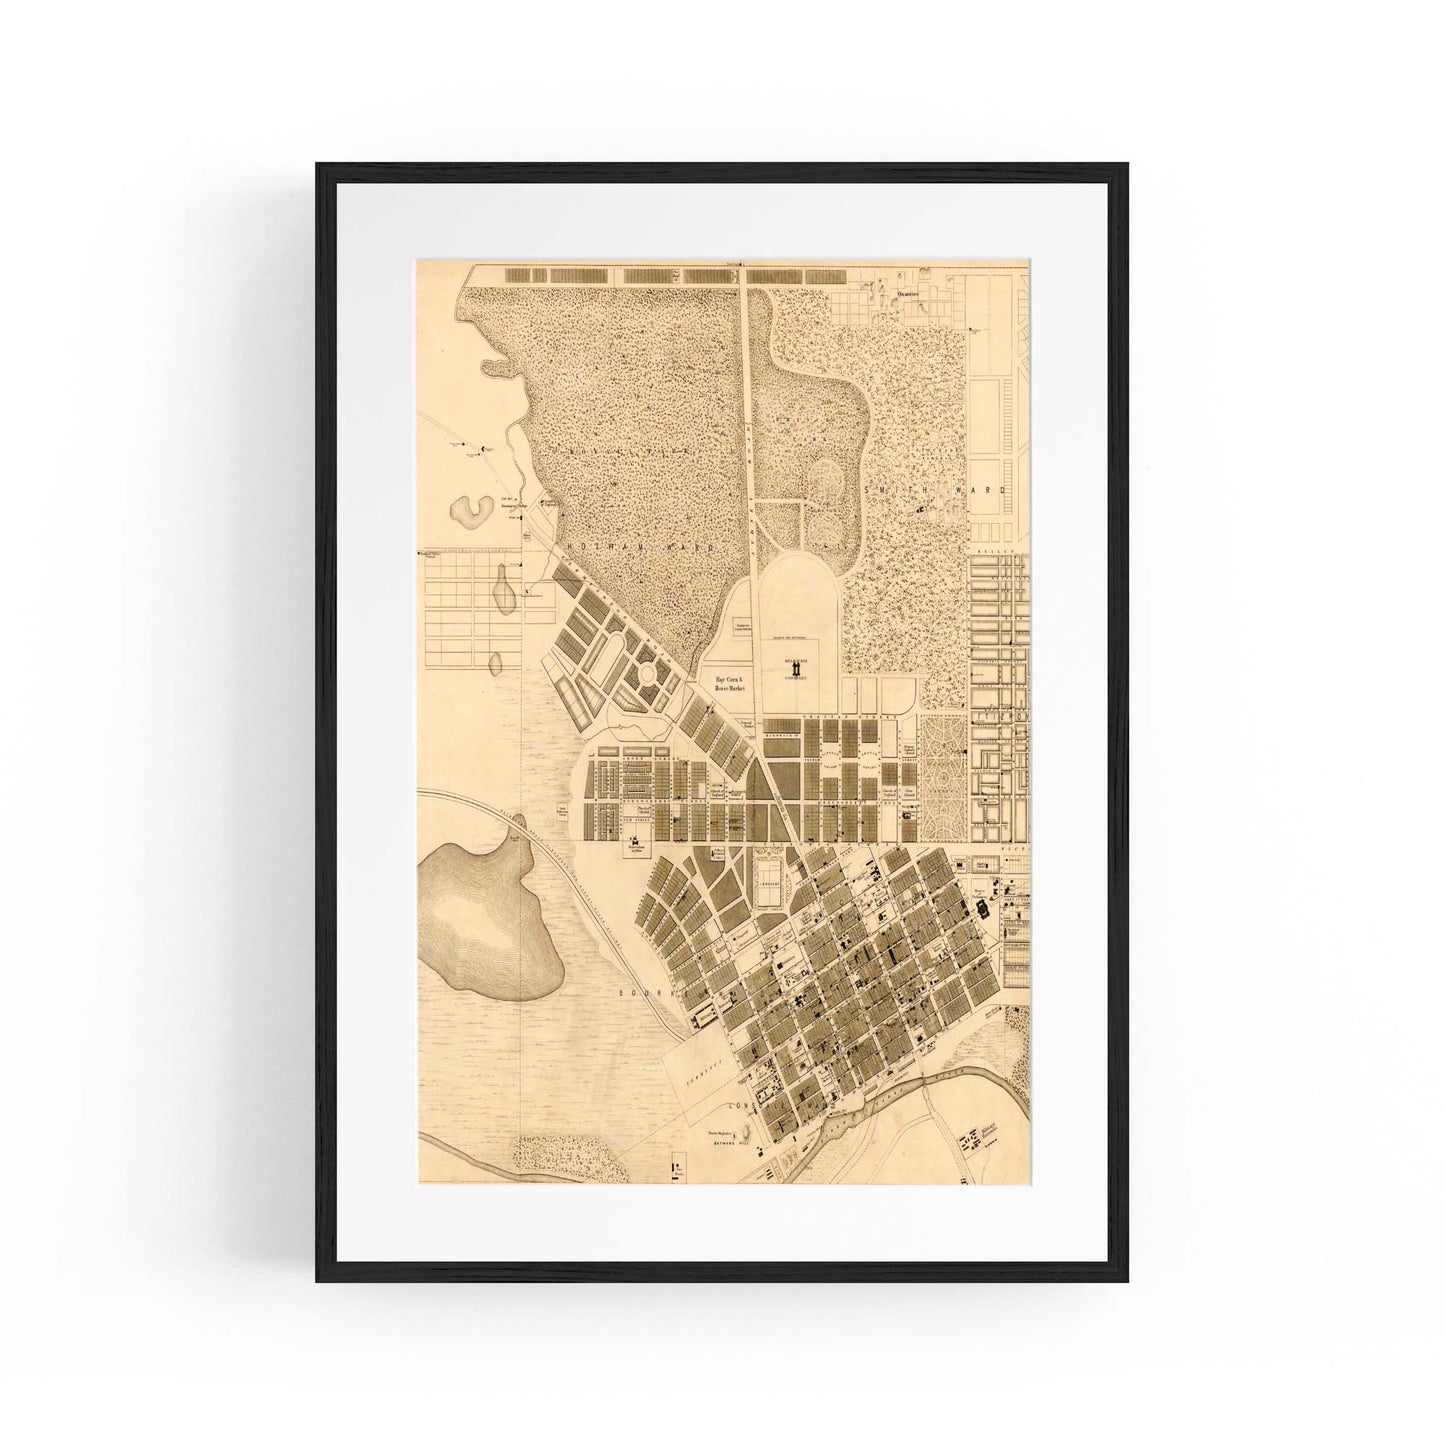 Melbourne Victoria Vintage Map Australia Wall Art #1 - The Affordable Art Company